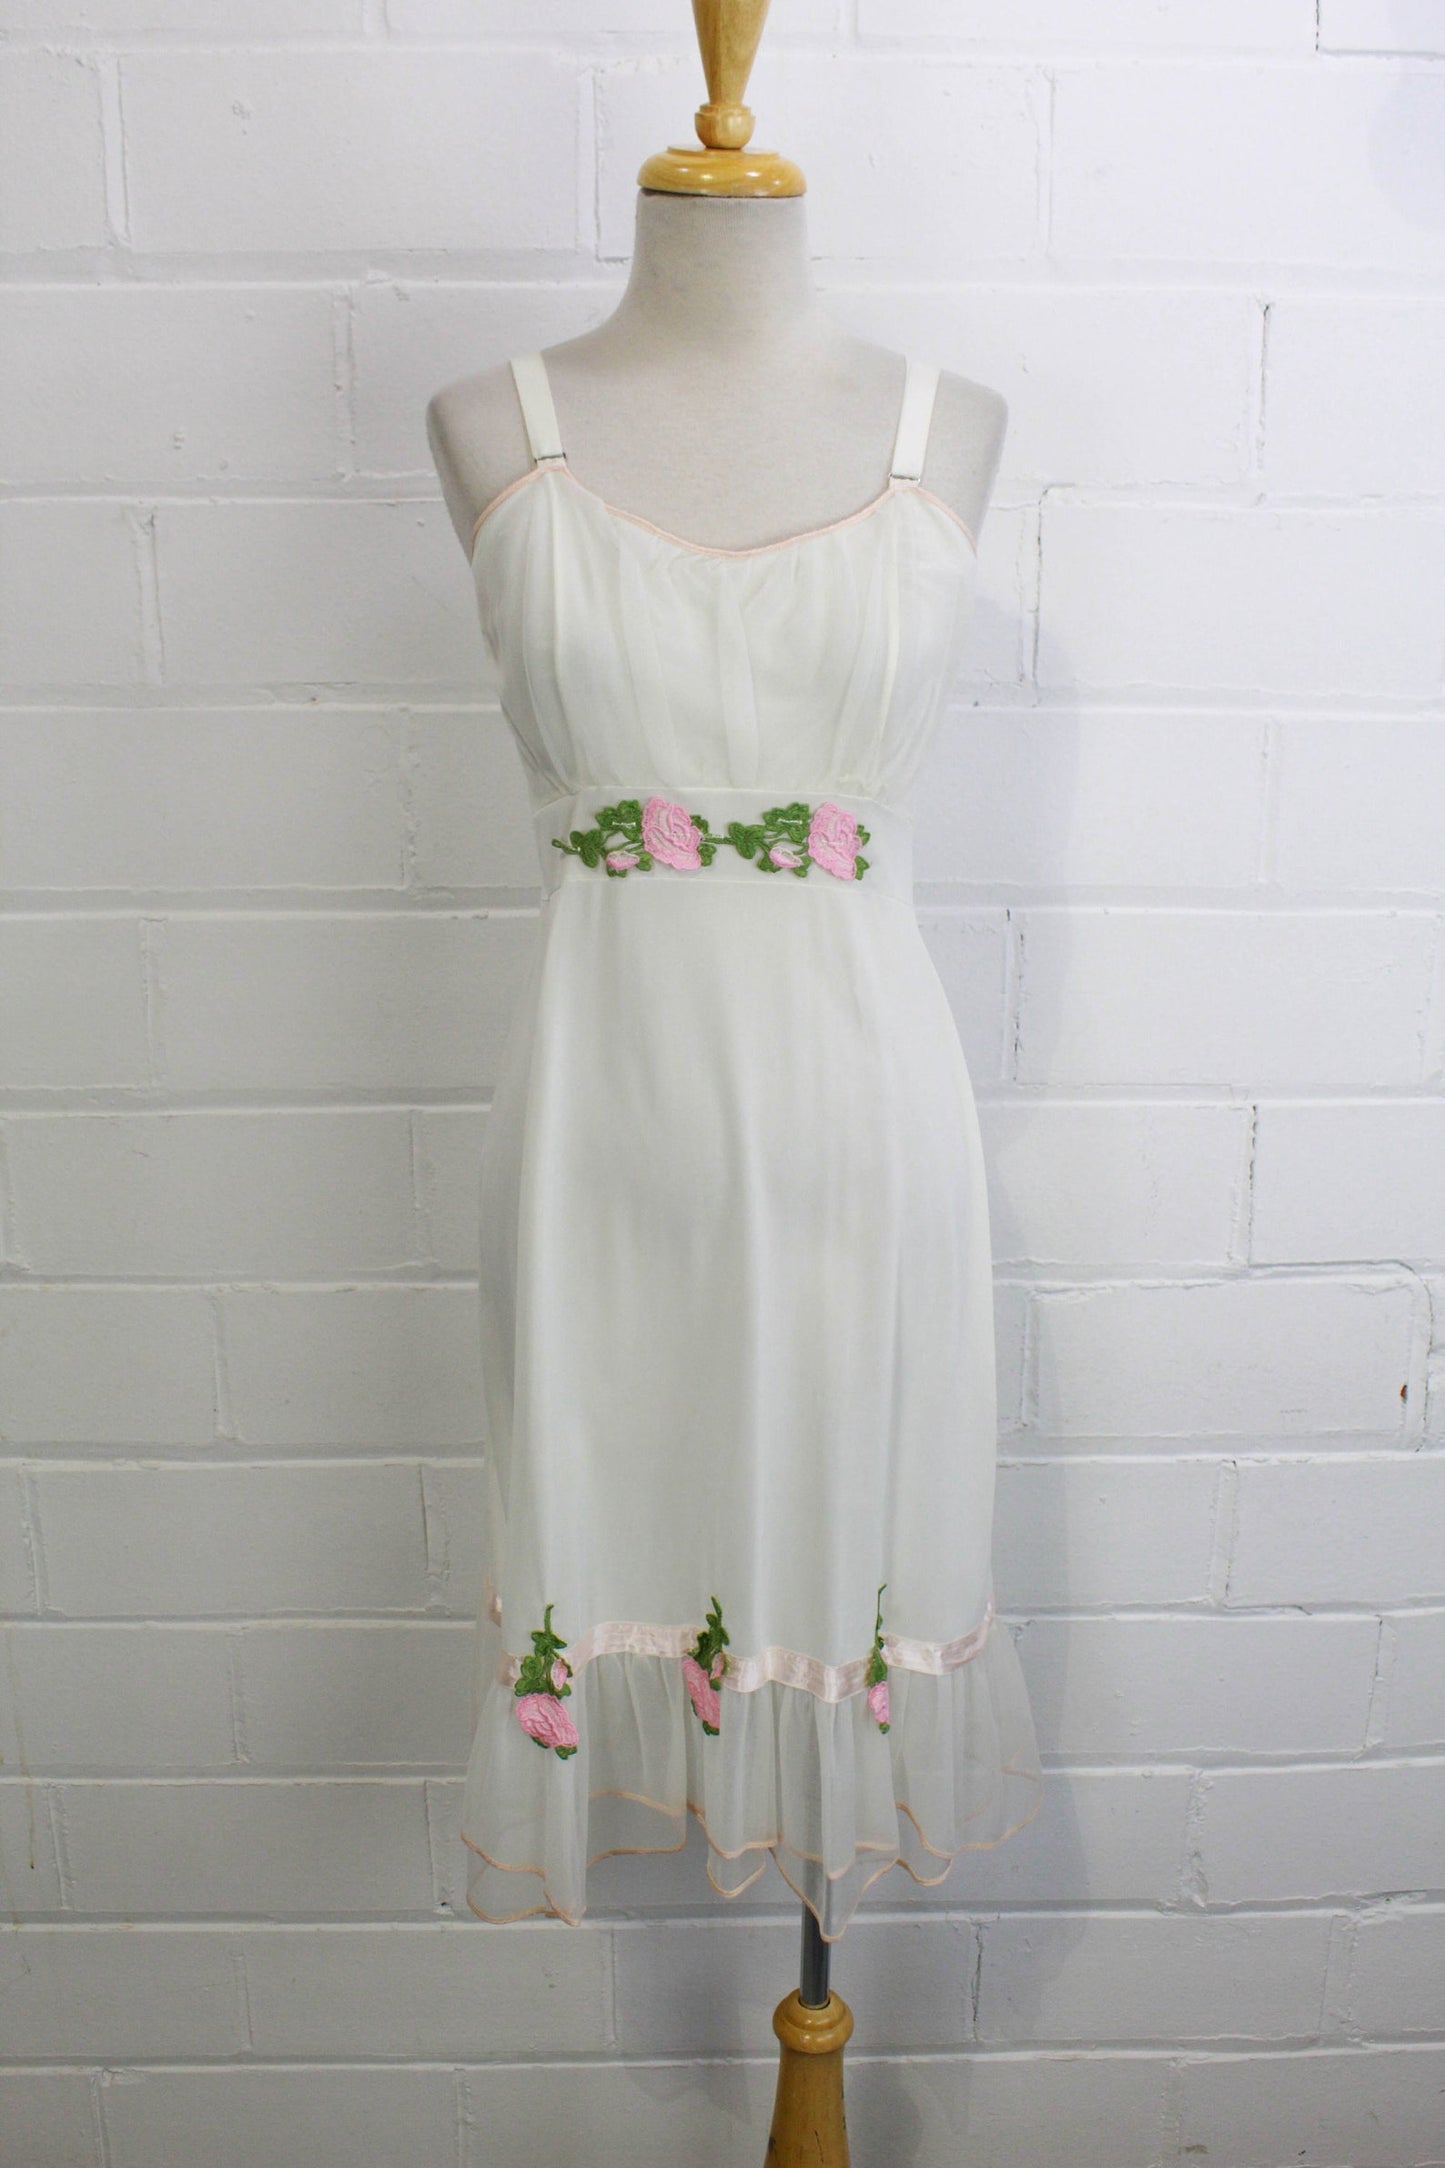 1960s White Nightgown Slip with Rose Appliques, Simone Rocha Jean Paul Gaultier Style Romantic Coquette Aesthetic 